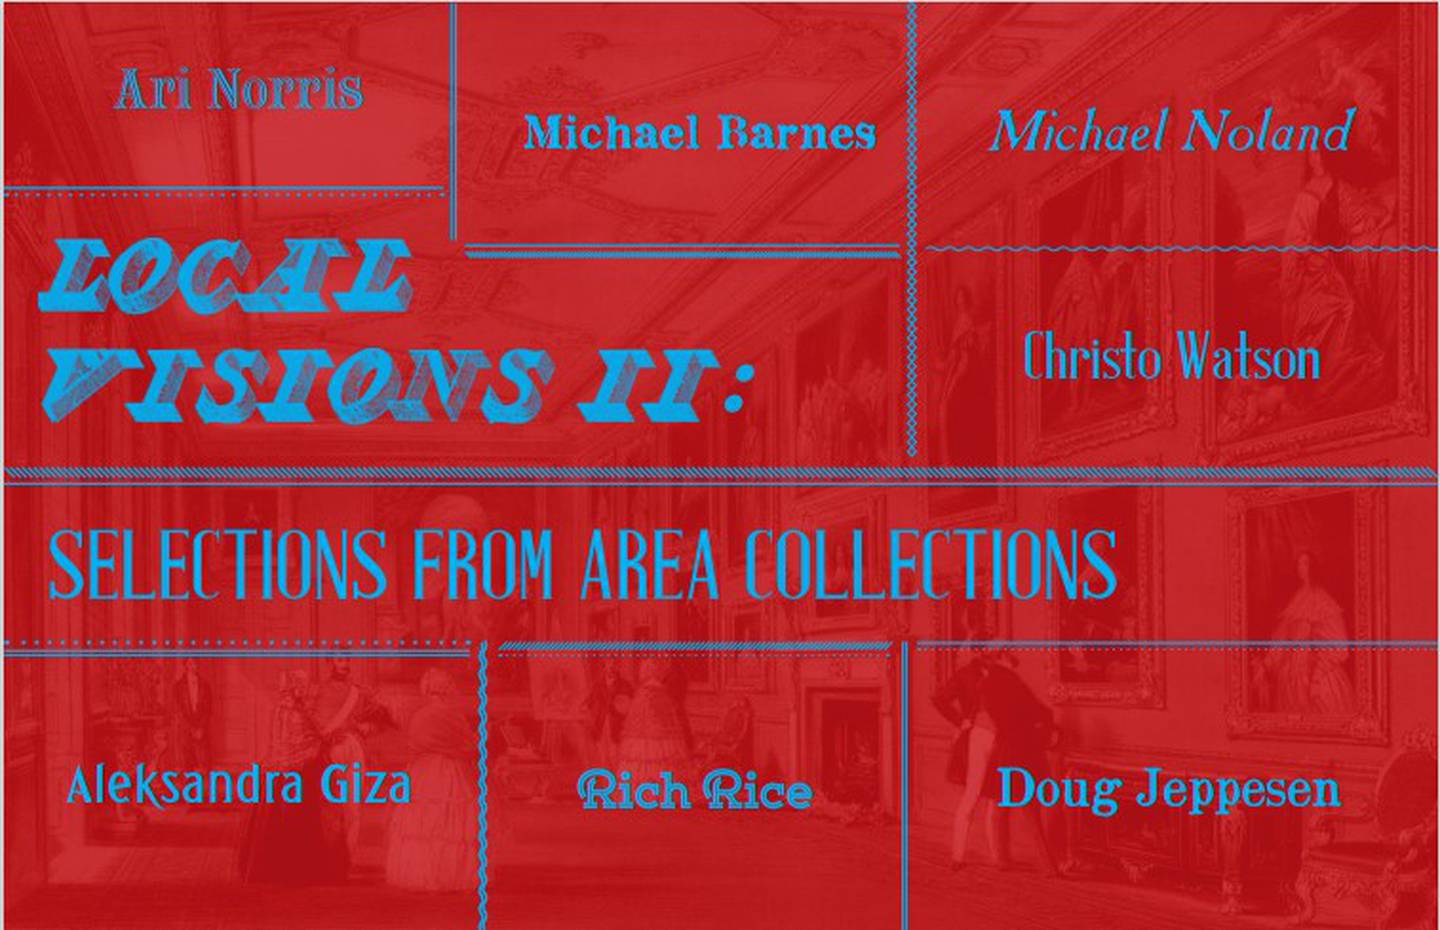 Postcard of the "Local Visions II" exhibit featuring the names of the exhibit collectors.